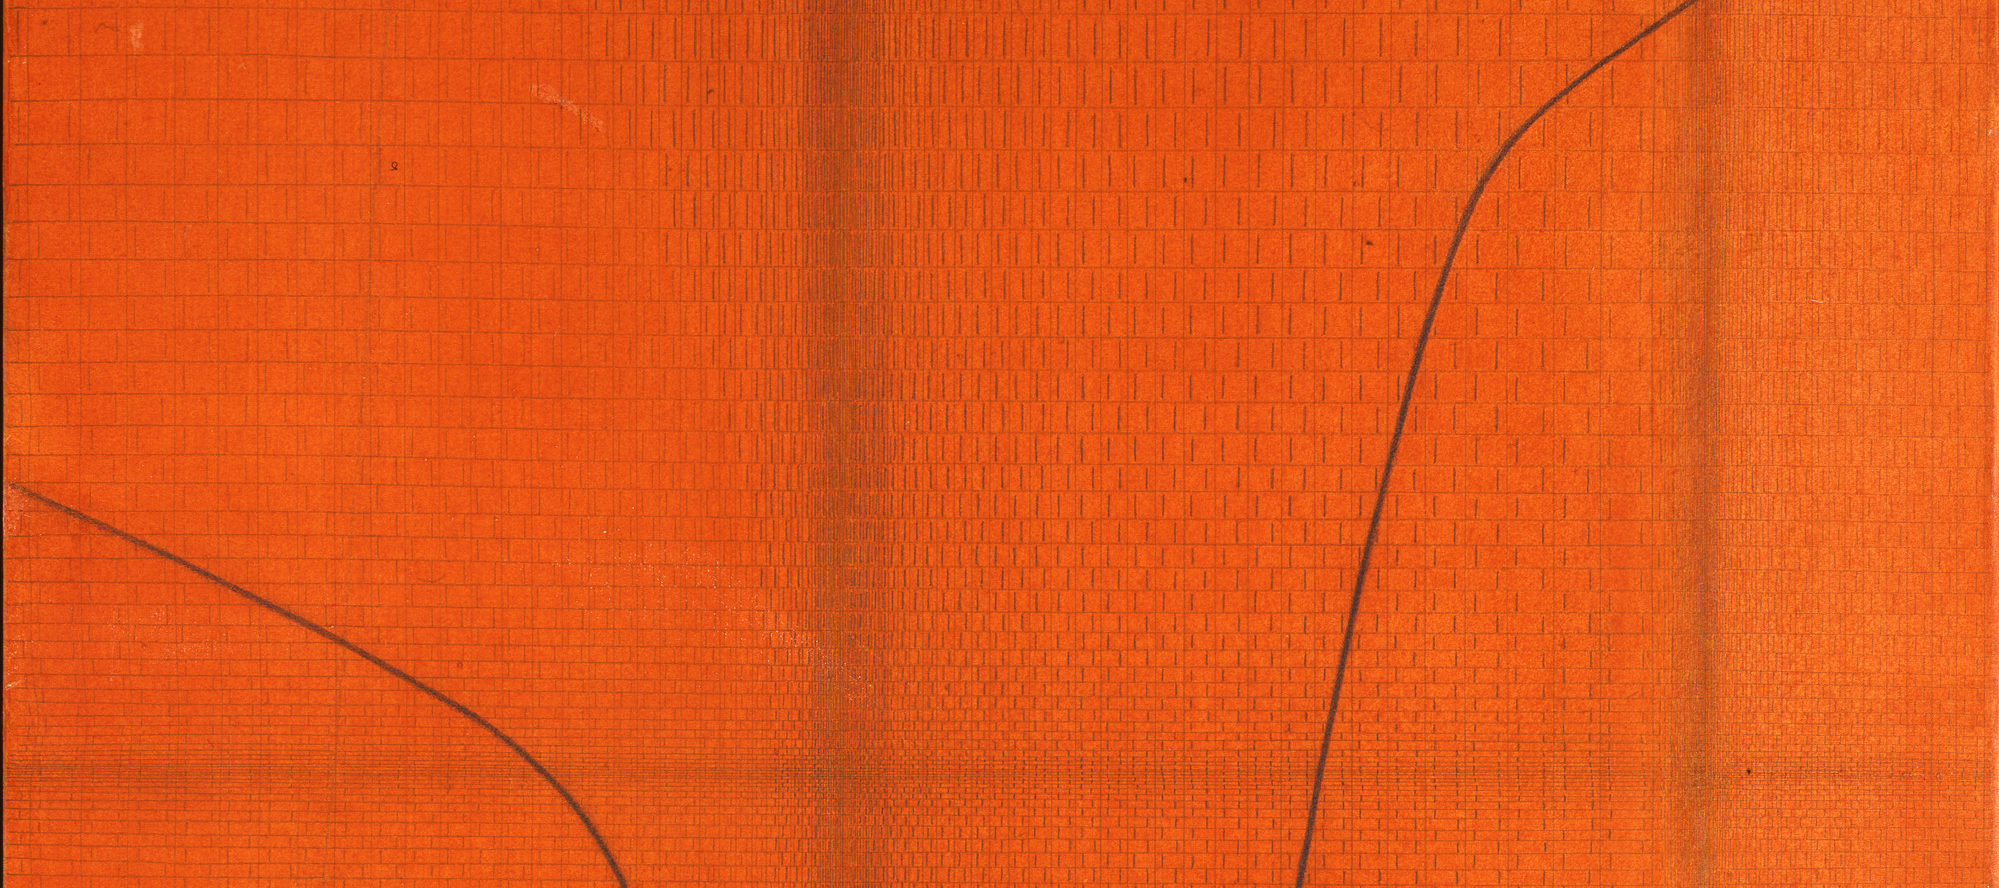 Bold orangey-red paint and pencil artwork with faint pattern like snakeskin. Two thin black lines curves toward the middle of the work from the right and left sides.